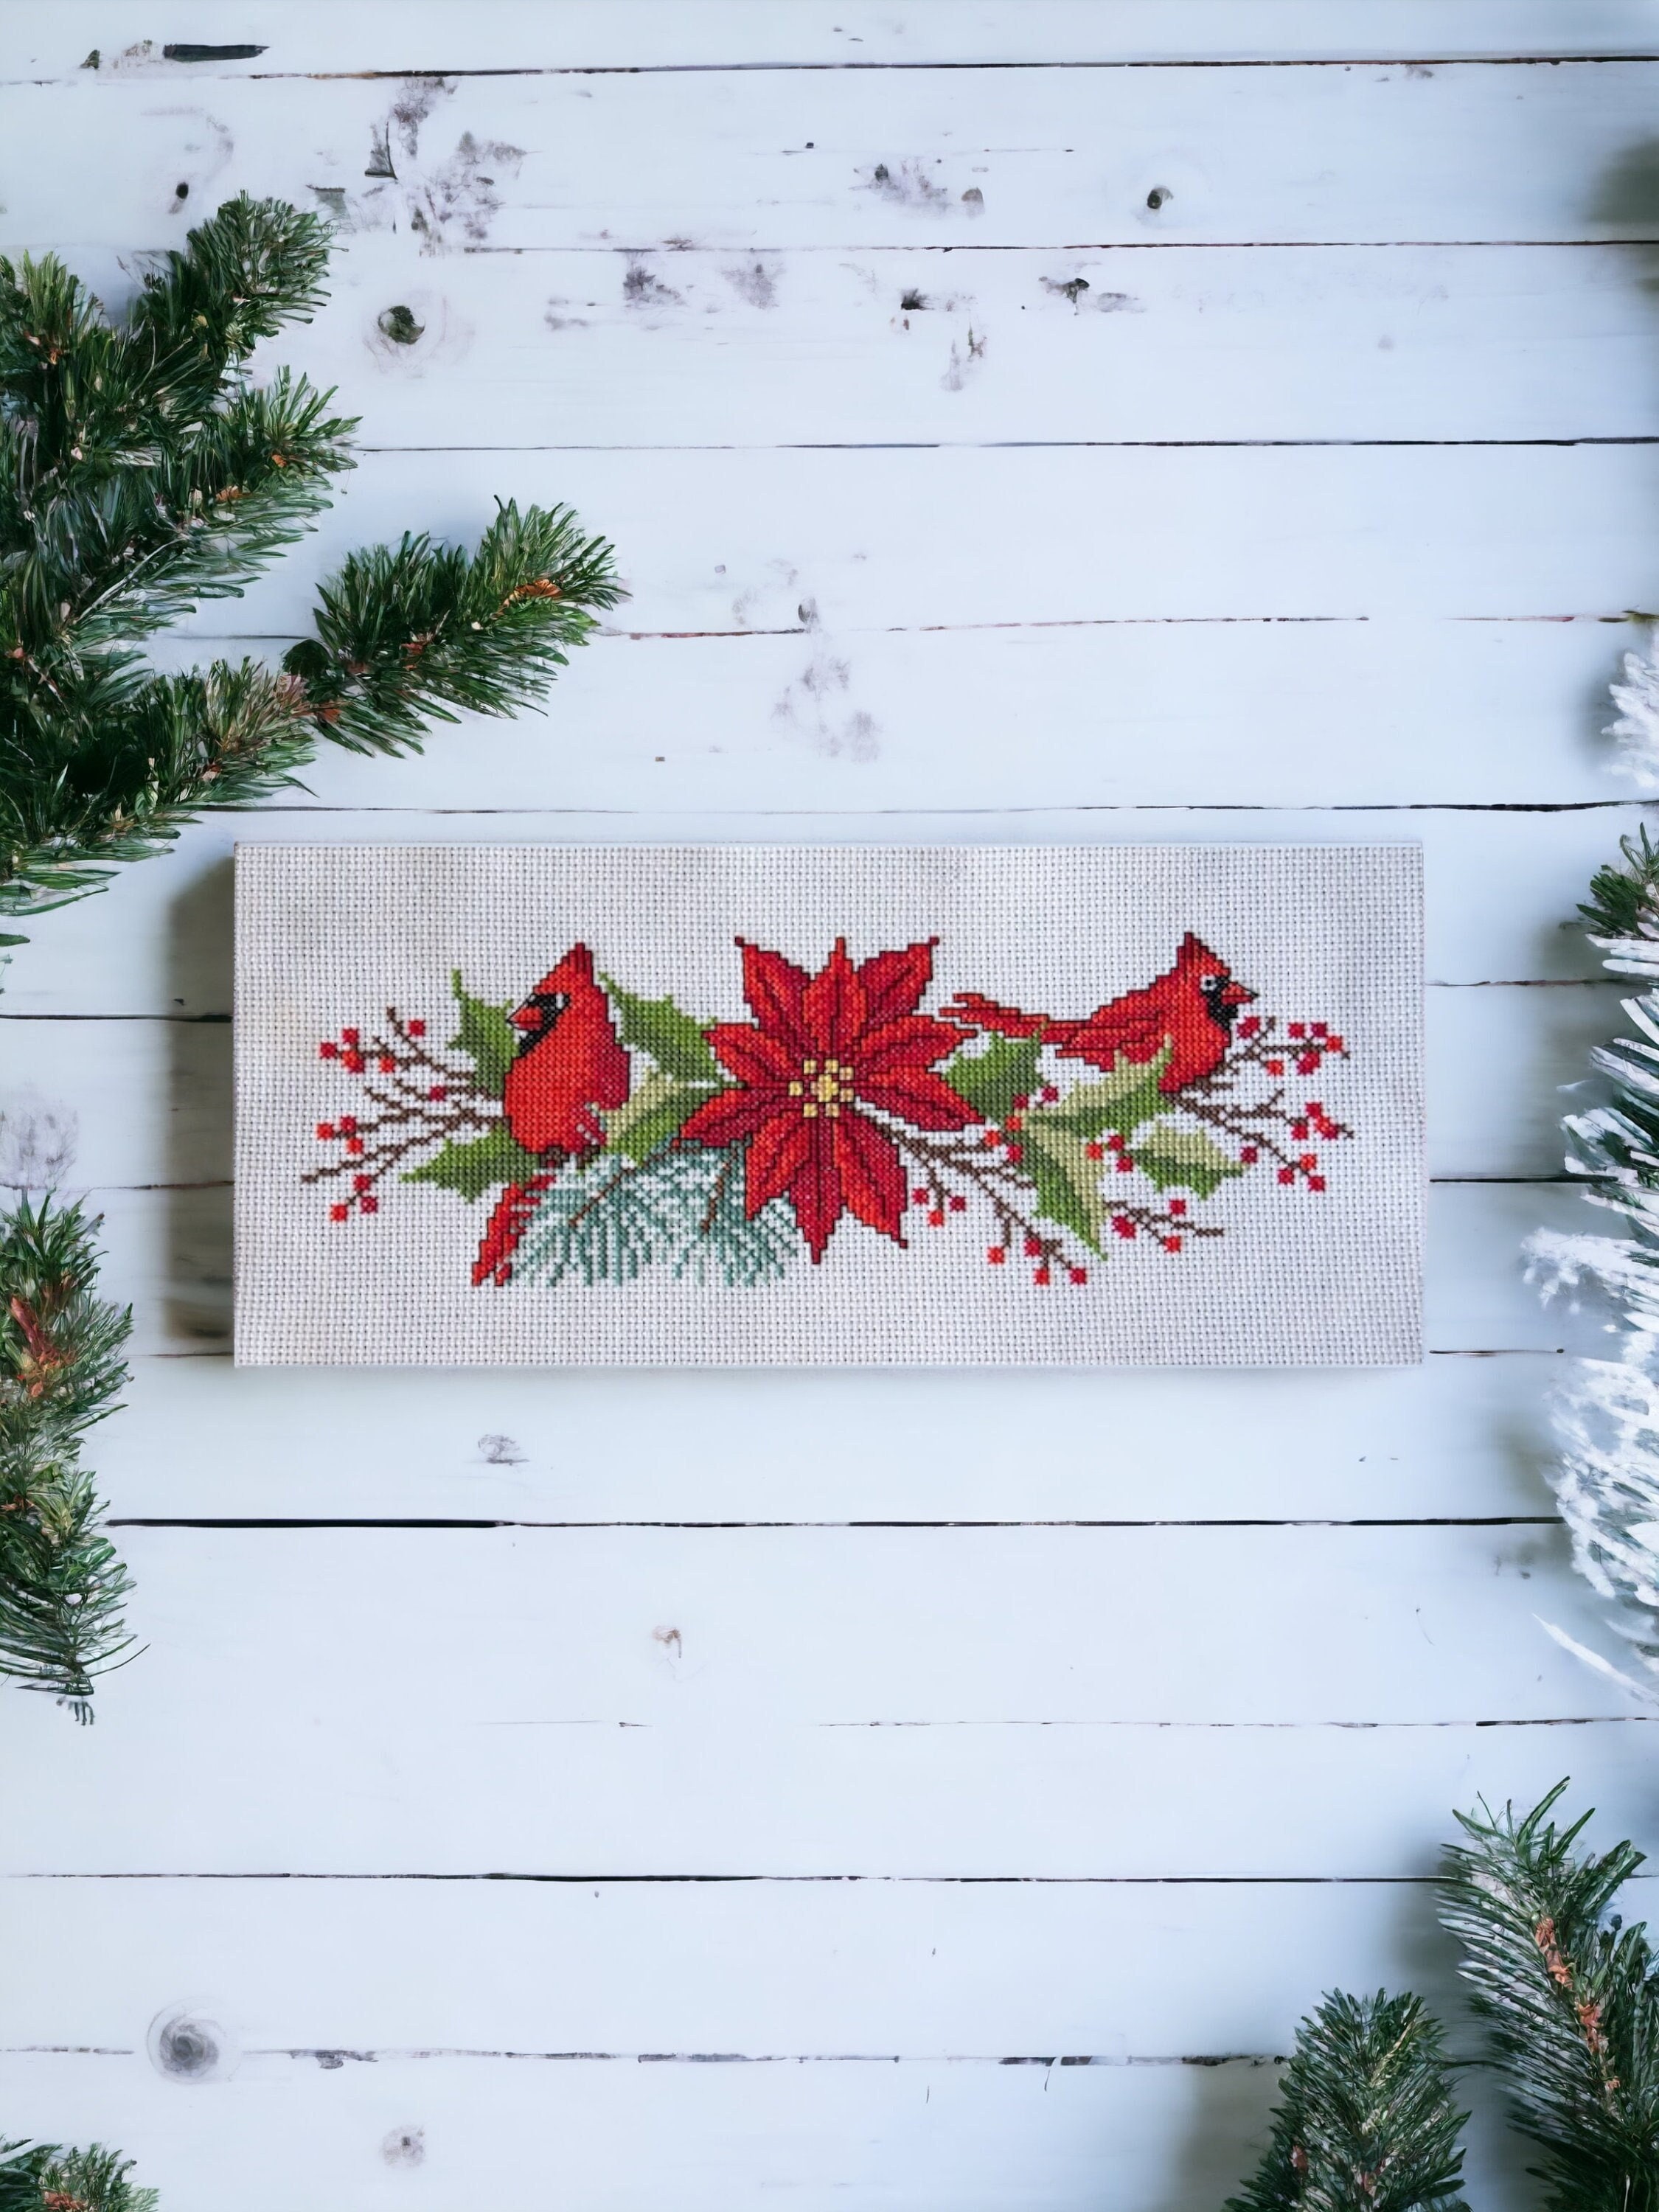 Christmas Cardinal Runner Rug Non Slip Washable Rug Pad,40In×20In Christmas  Deco